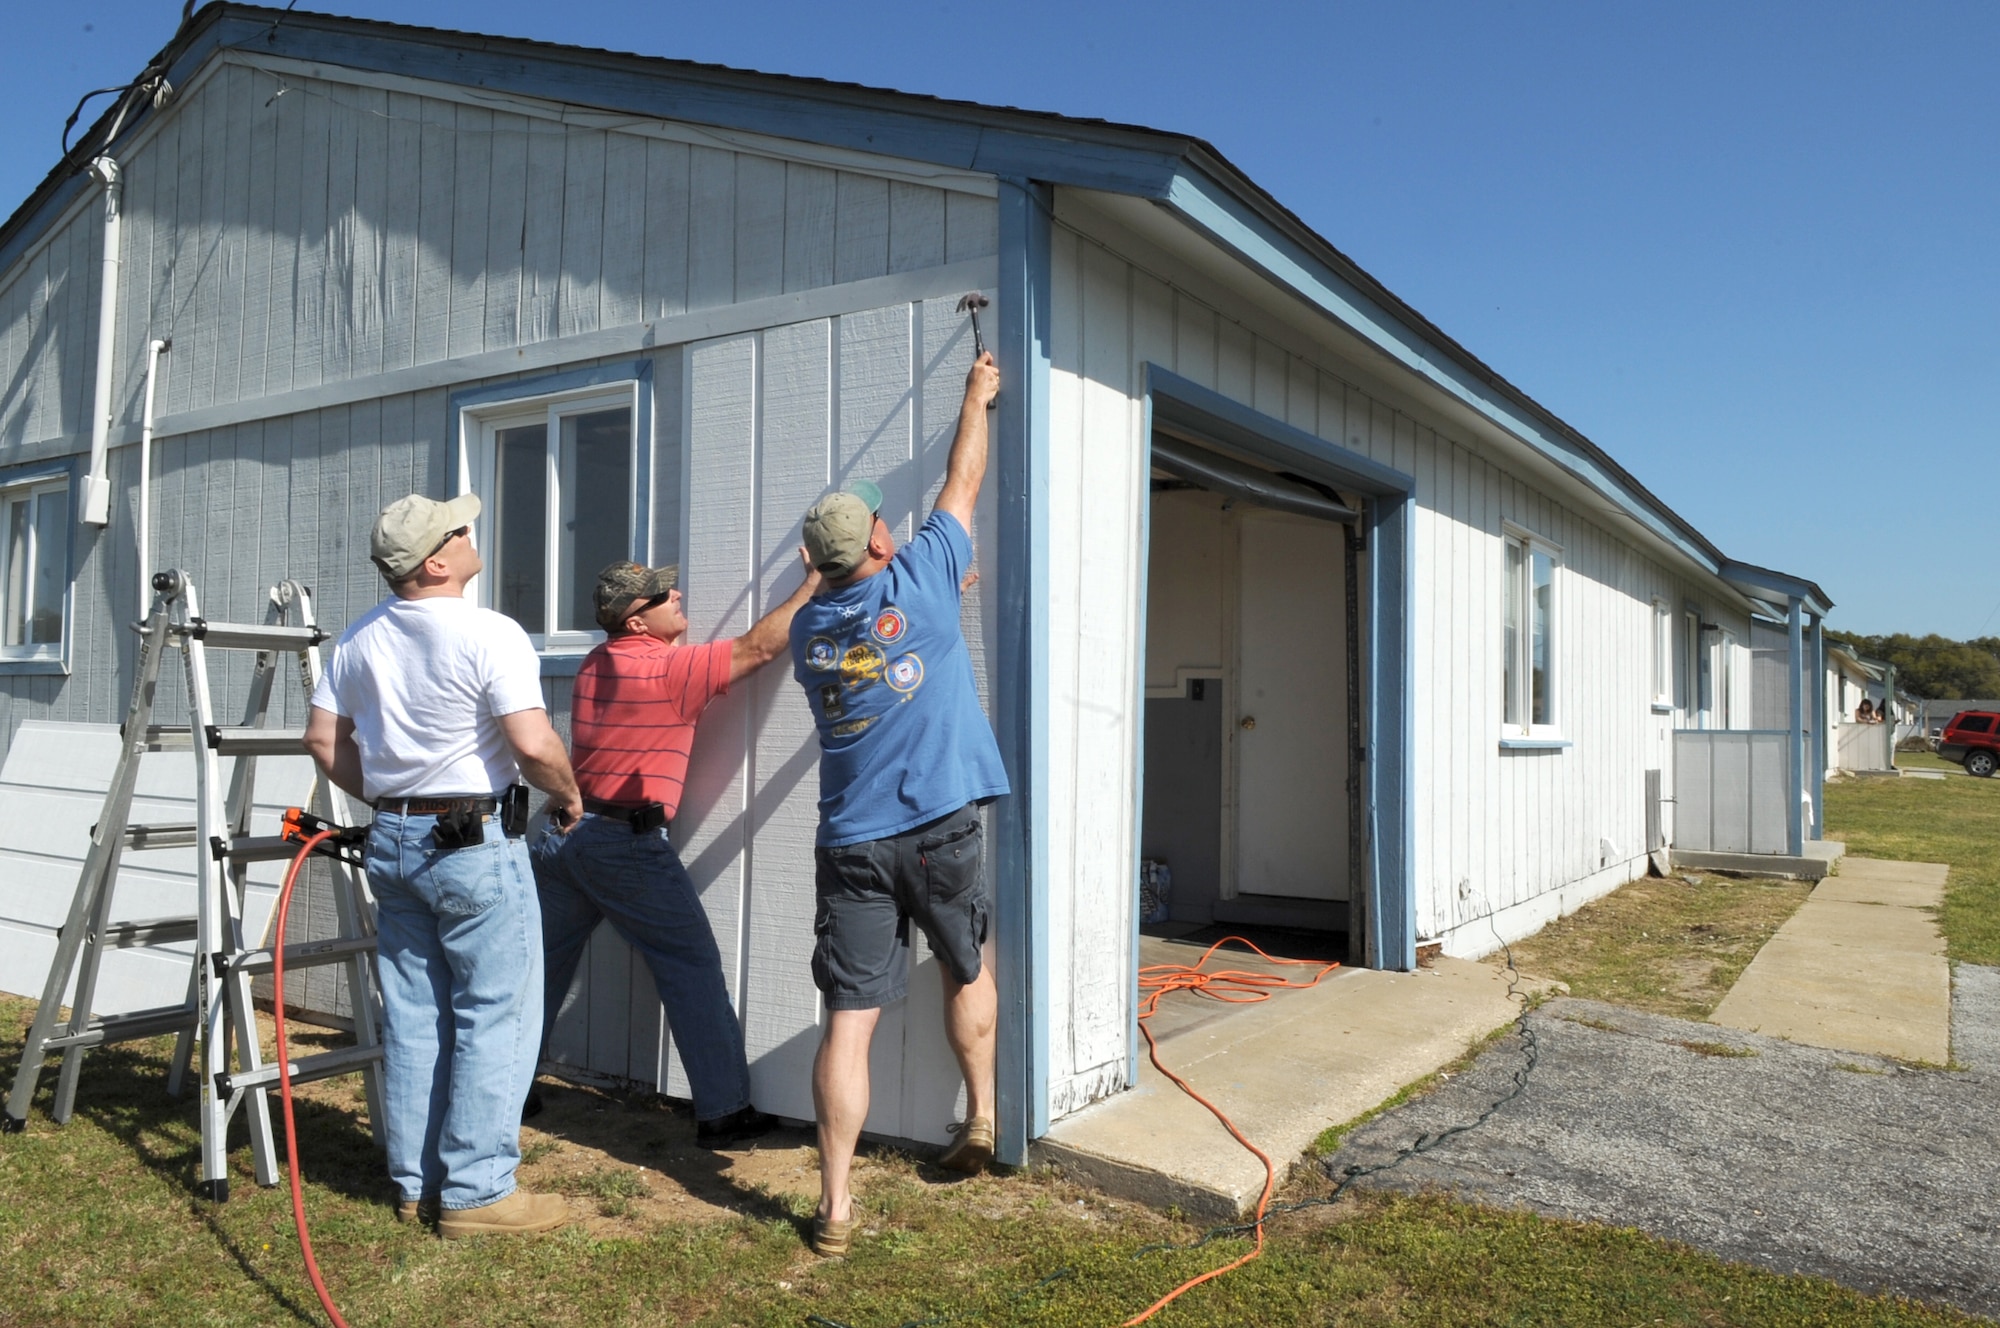 FORT FISHER RECREATION AREA, N.C -- Volunteers from Seymour Johnson Air Force Base nail new siding onto cottages here, April 7, 2010. Before it closed in the late 1980's, Fort Fisher was an Air Force radar complex. (U.S. Air Force photo/Staff Sergeant Courtney Richardson)